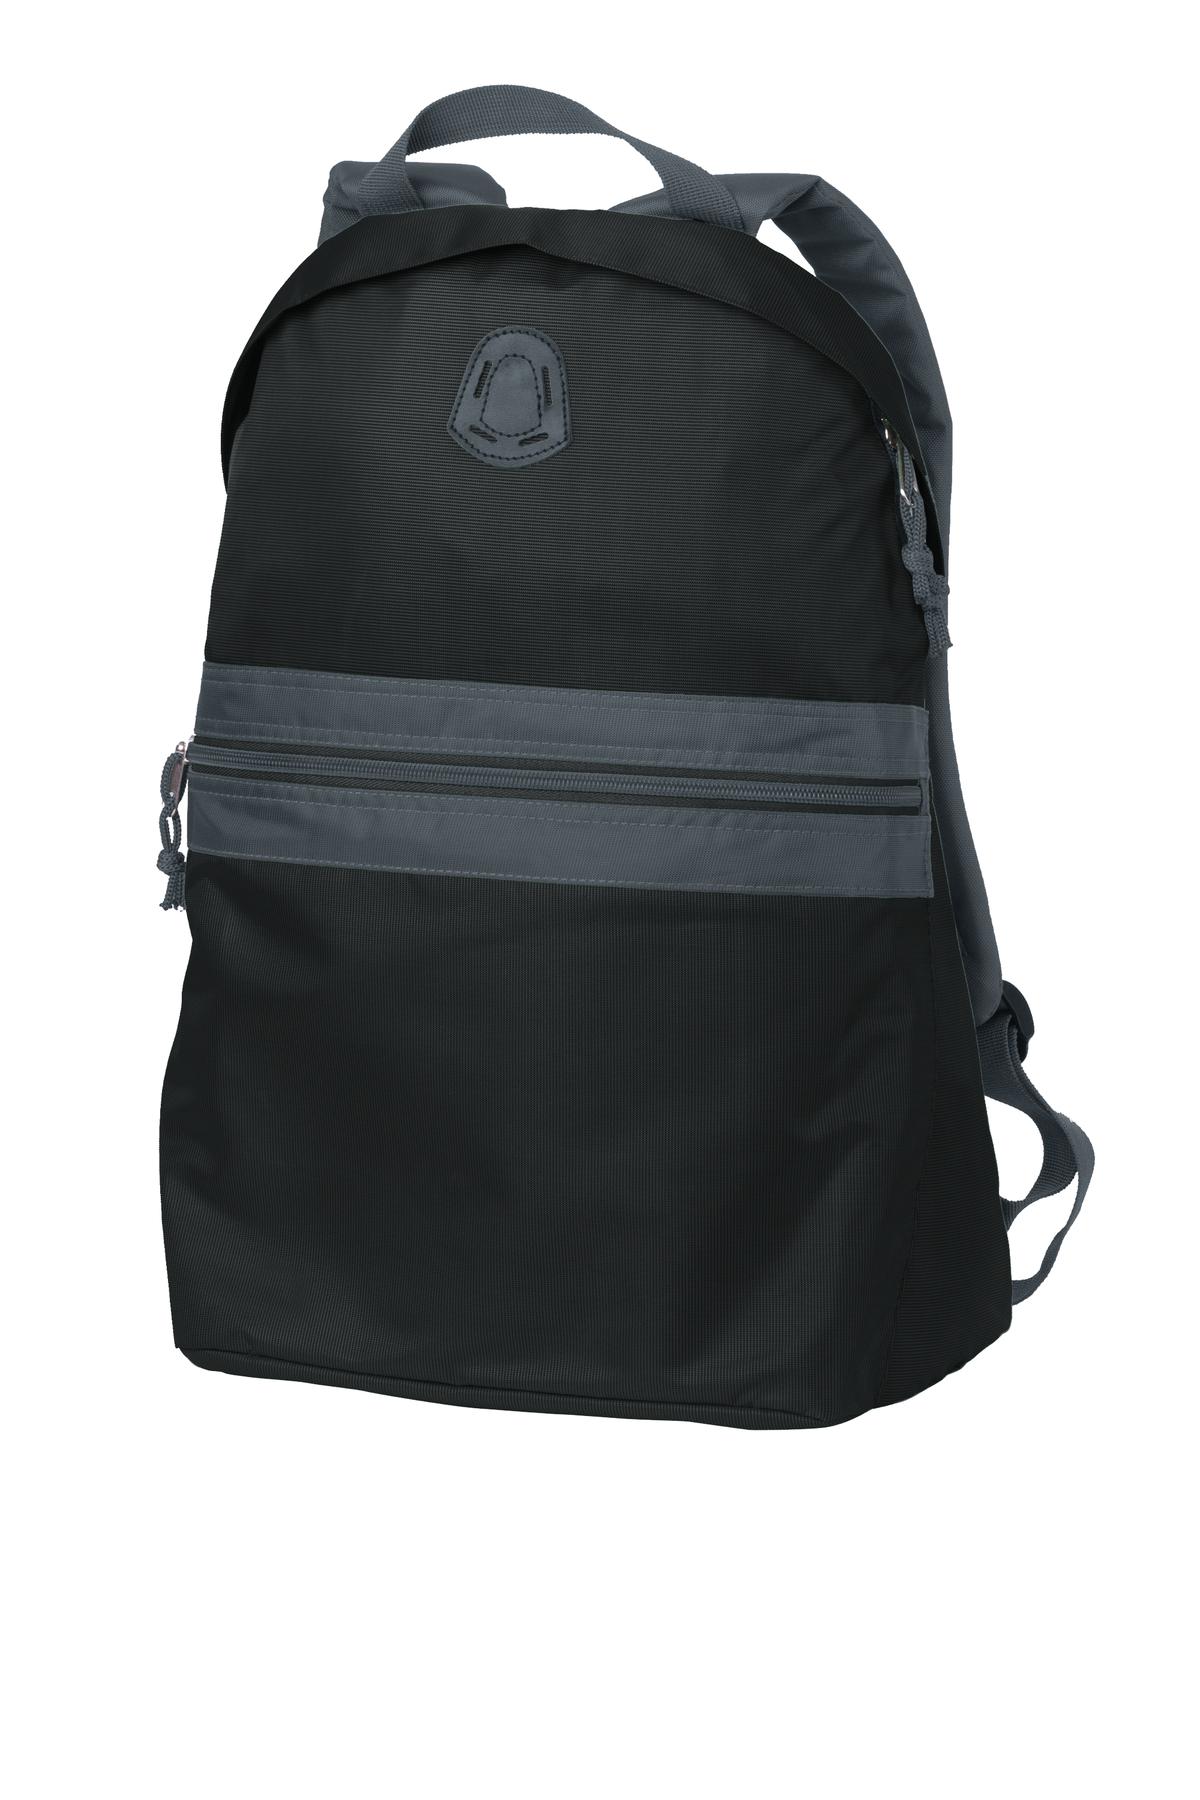 Photo of Port Authority Bags BG202  color  Nearly Black/ Smoke Grey